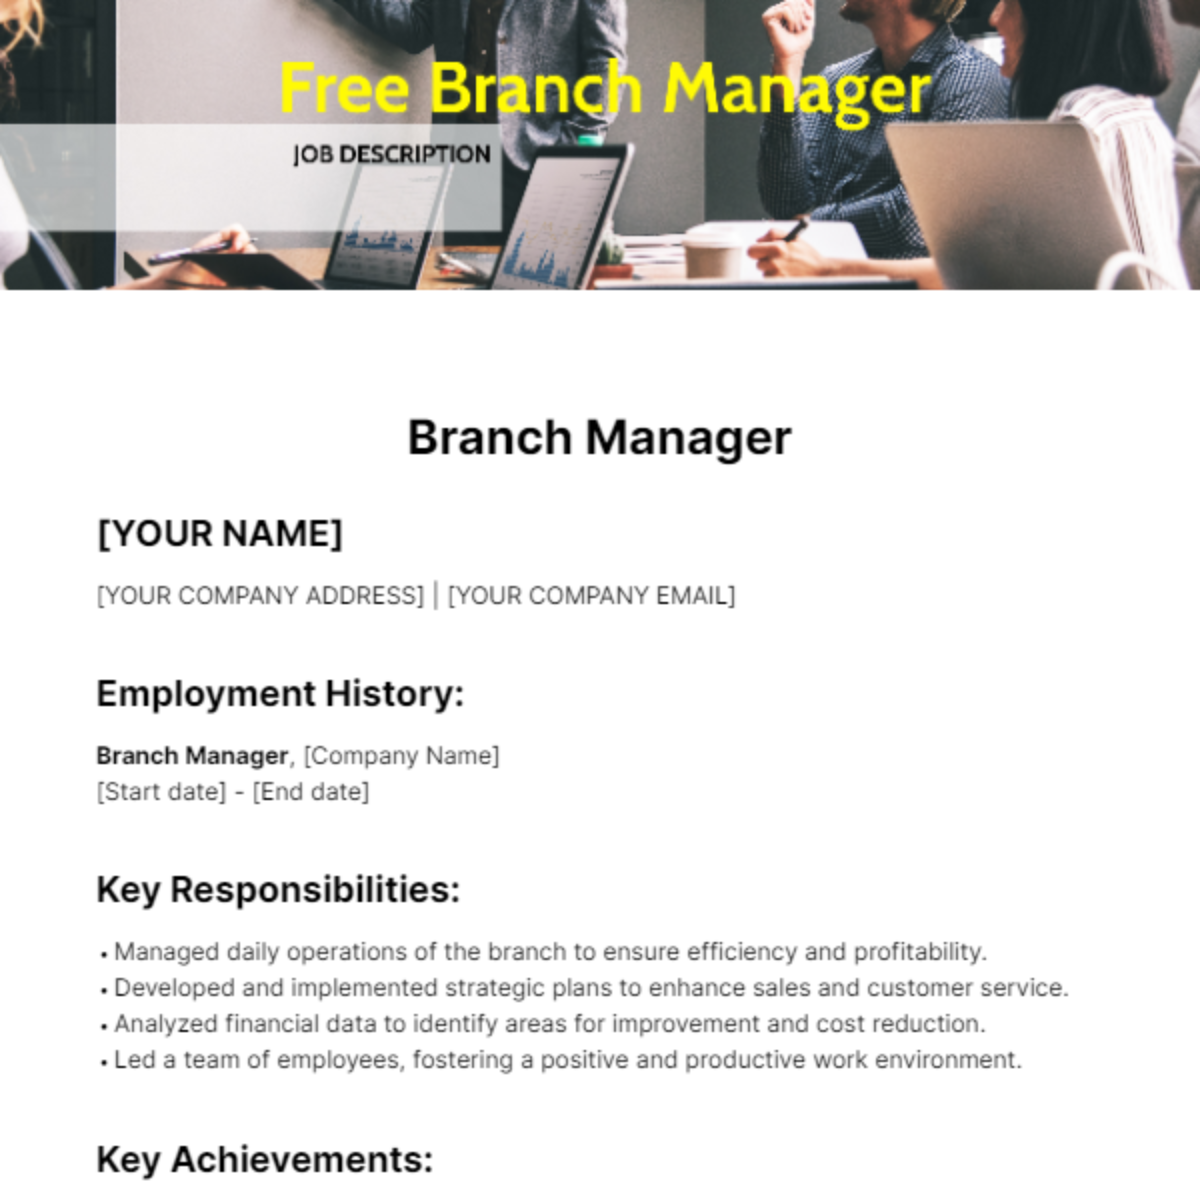 Free Branch Manager Job Description for Resume Template